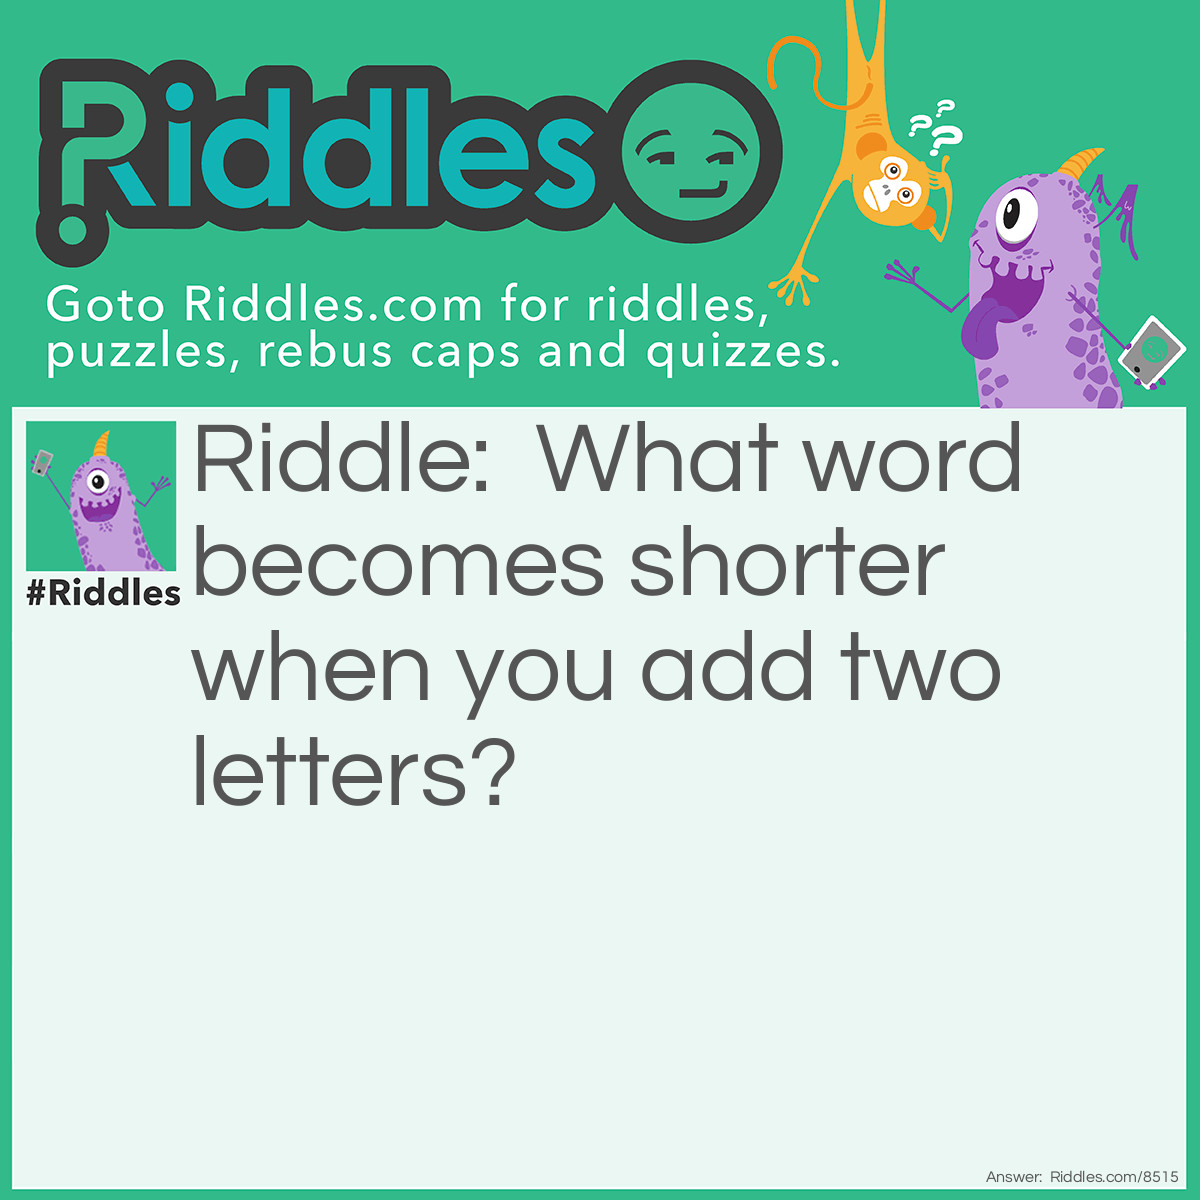 Riddle: What word becomes shorter when you add two letters? Answer: Short! Add 'er' to it and it becomes "shorter"!